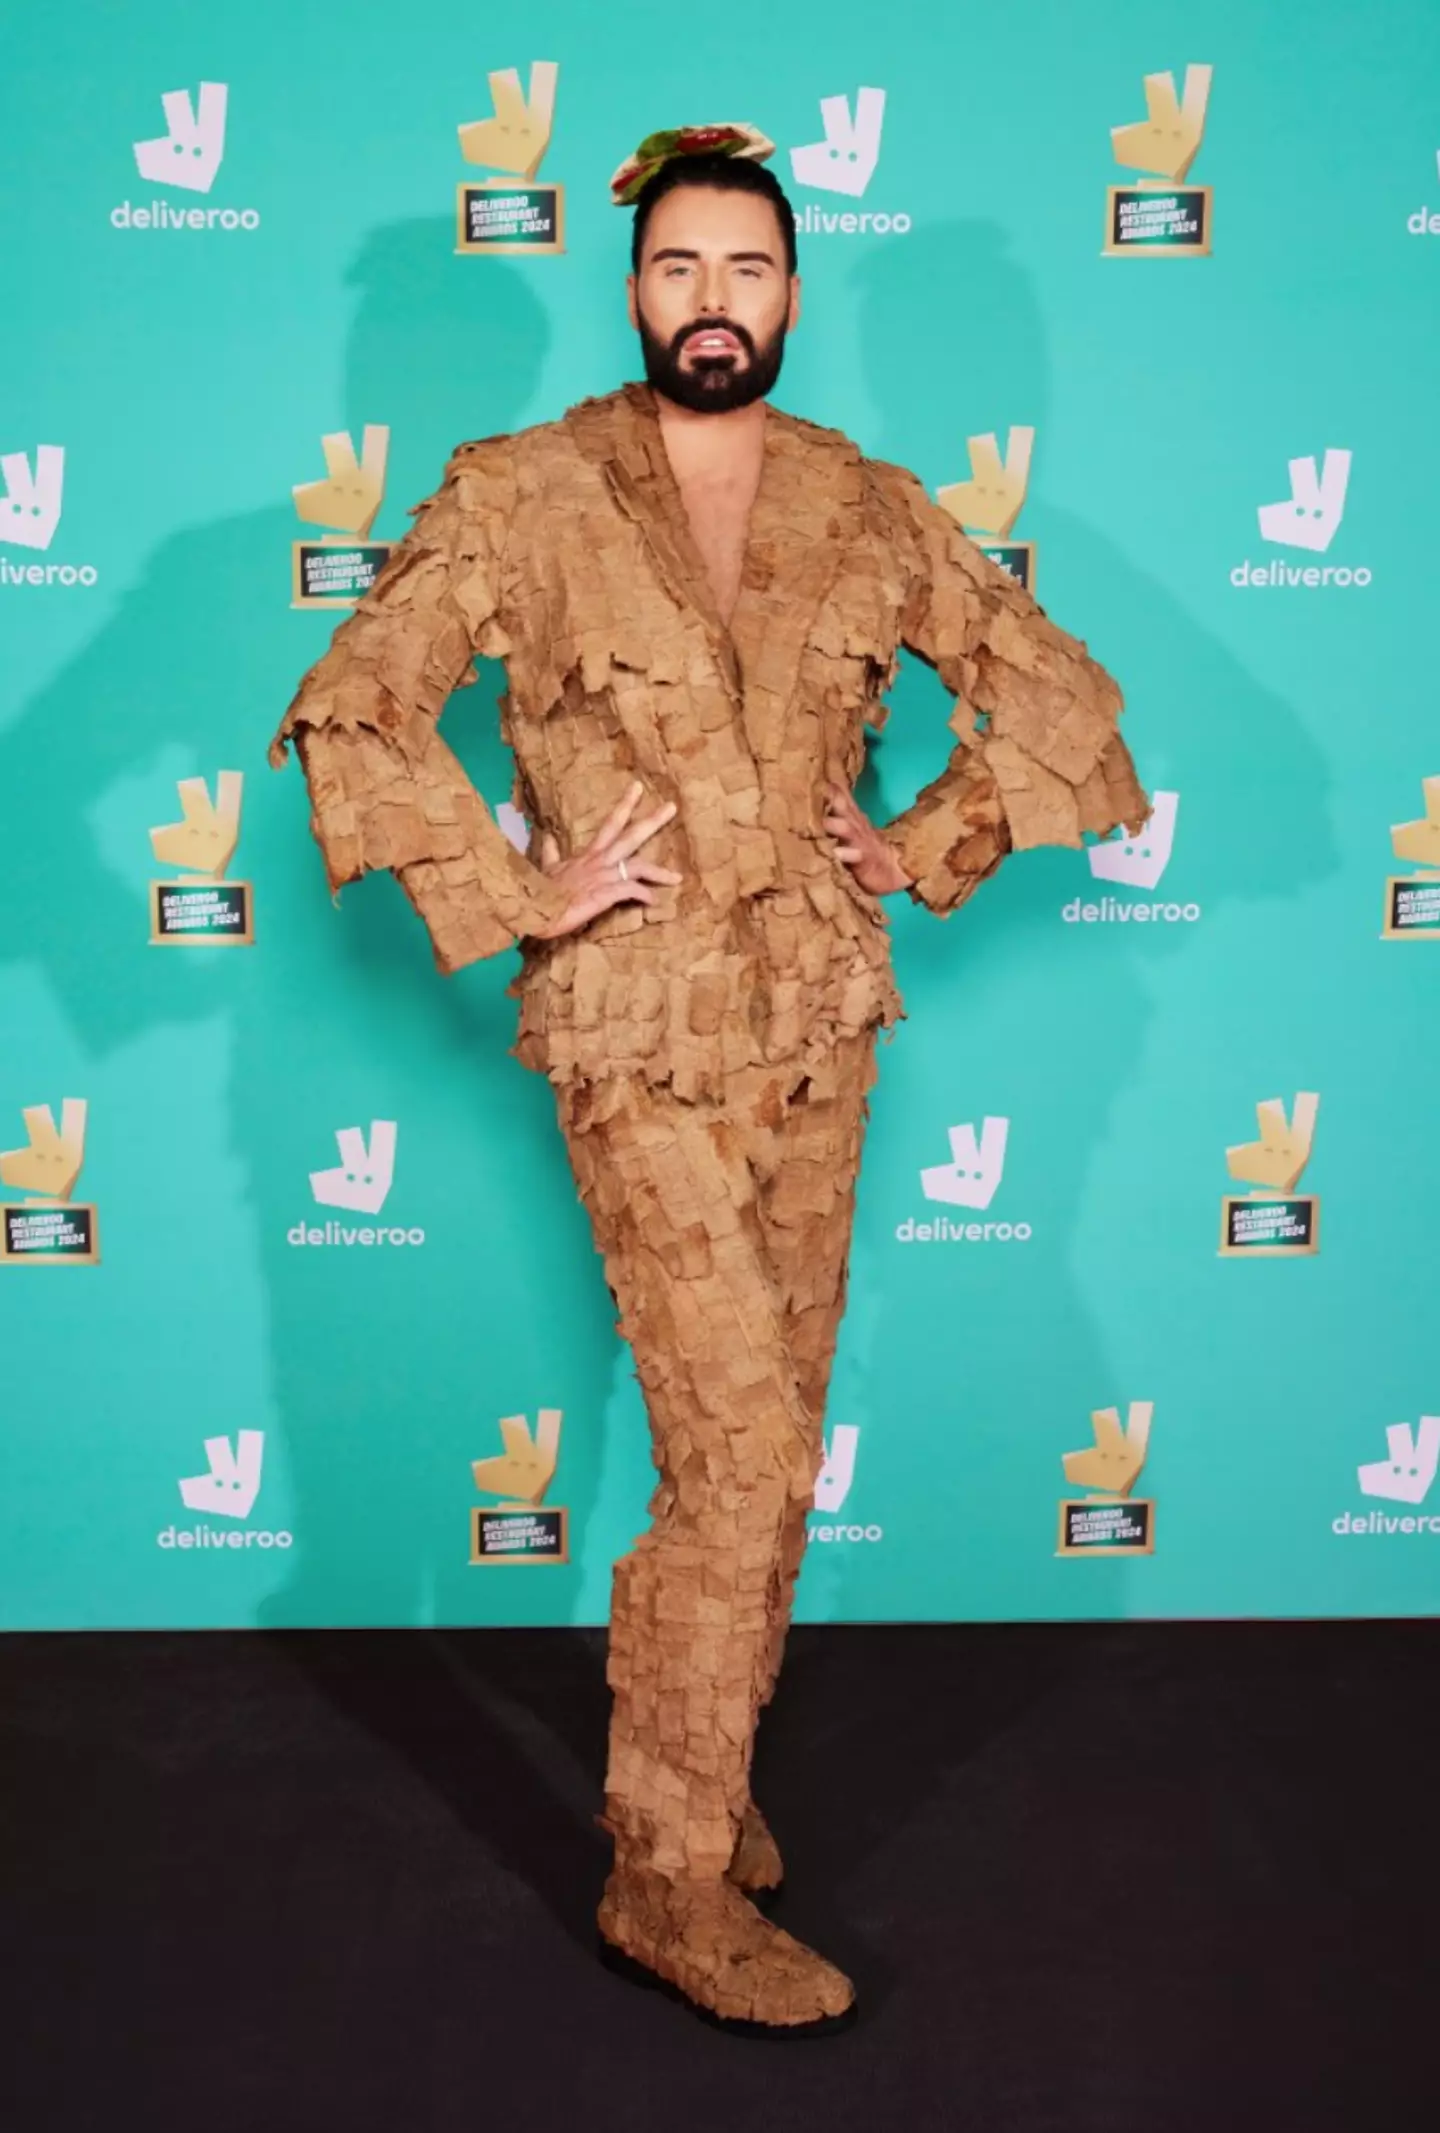 In homage to Lady Gaga, he wore a suit made entirely of kebab meat.